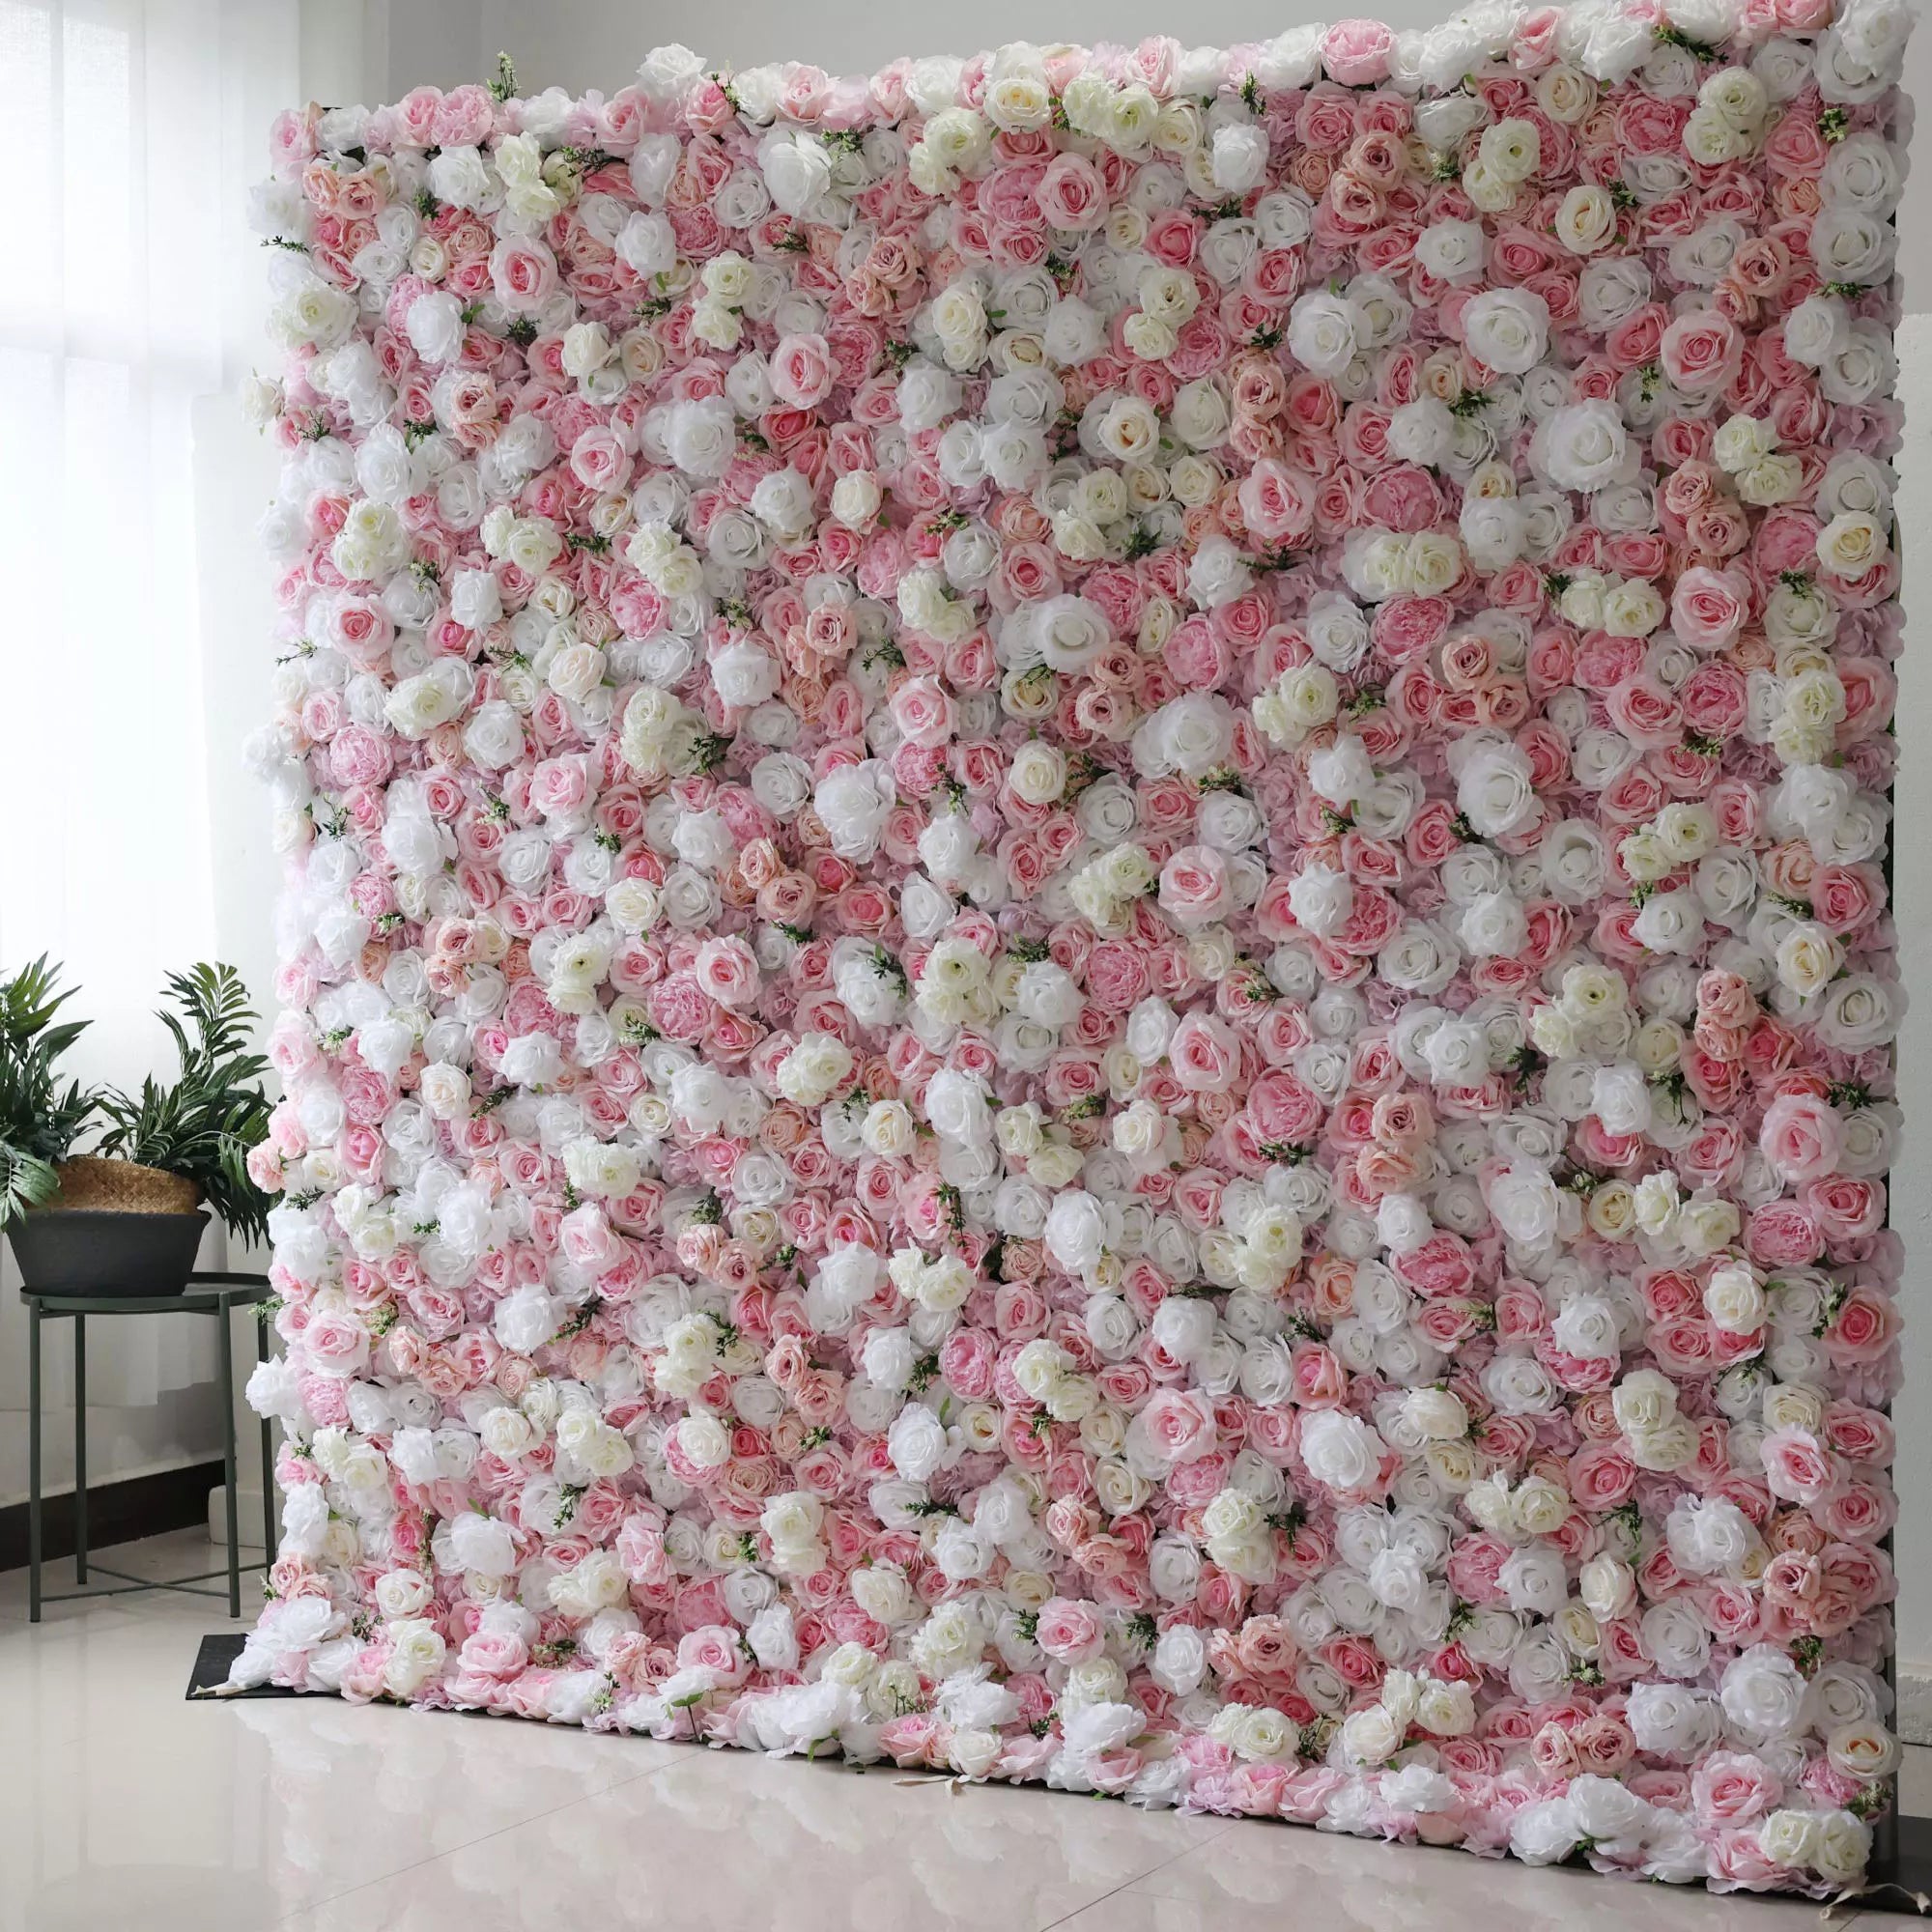 ValarFlowers Backdrop: Step into the Blush Ballet, a world of pastel roses dancing in delicate harmony. From faint whispers to deep blushes, this backdrop radiates rosy elegance for your event.